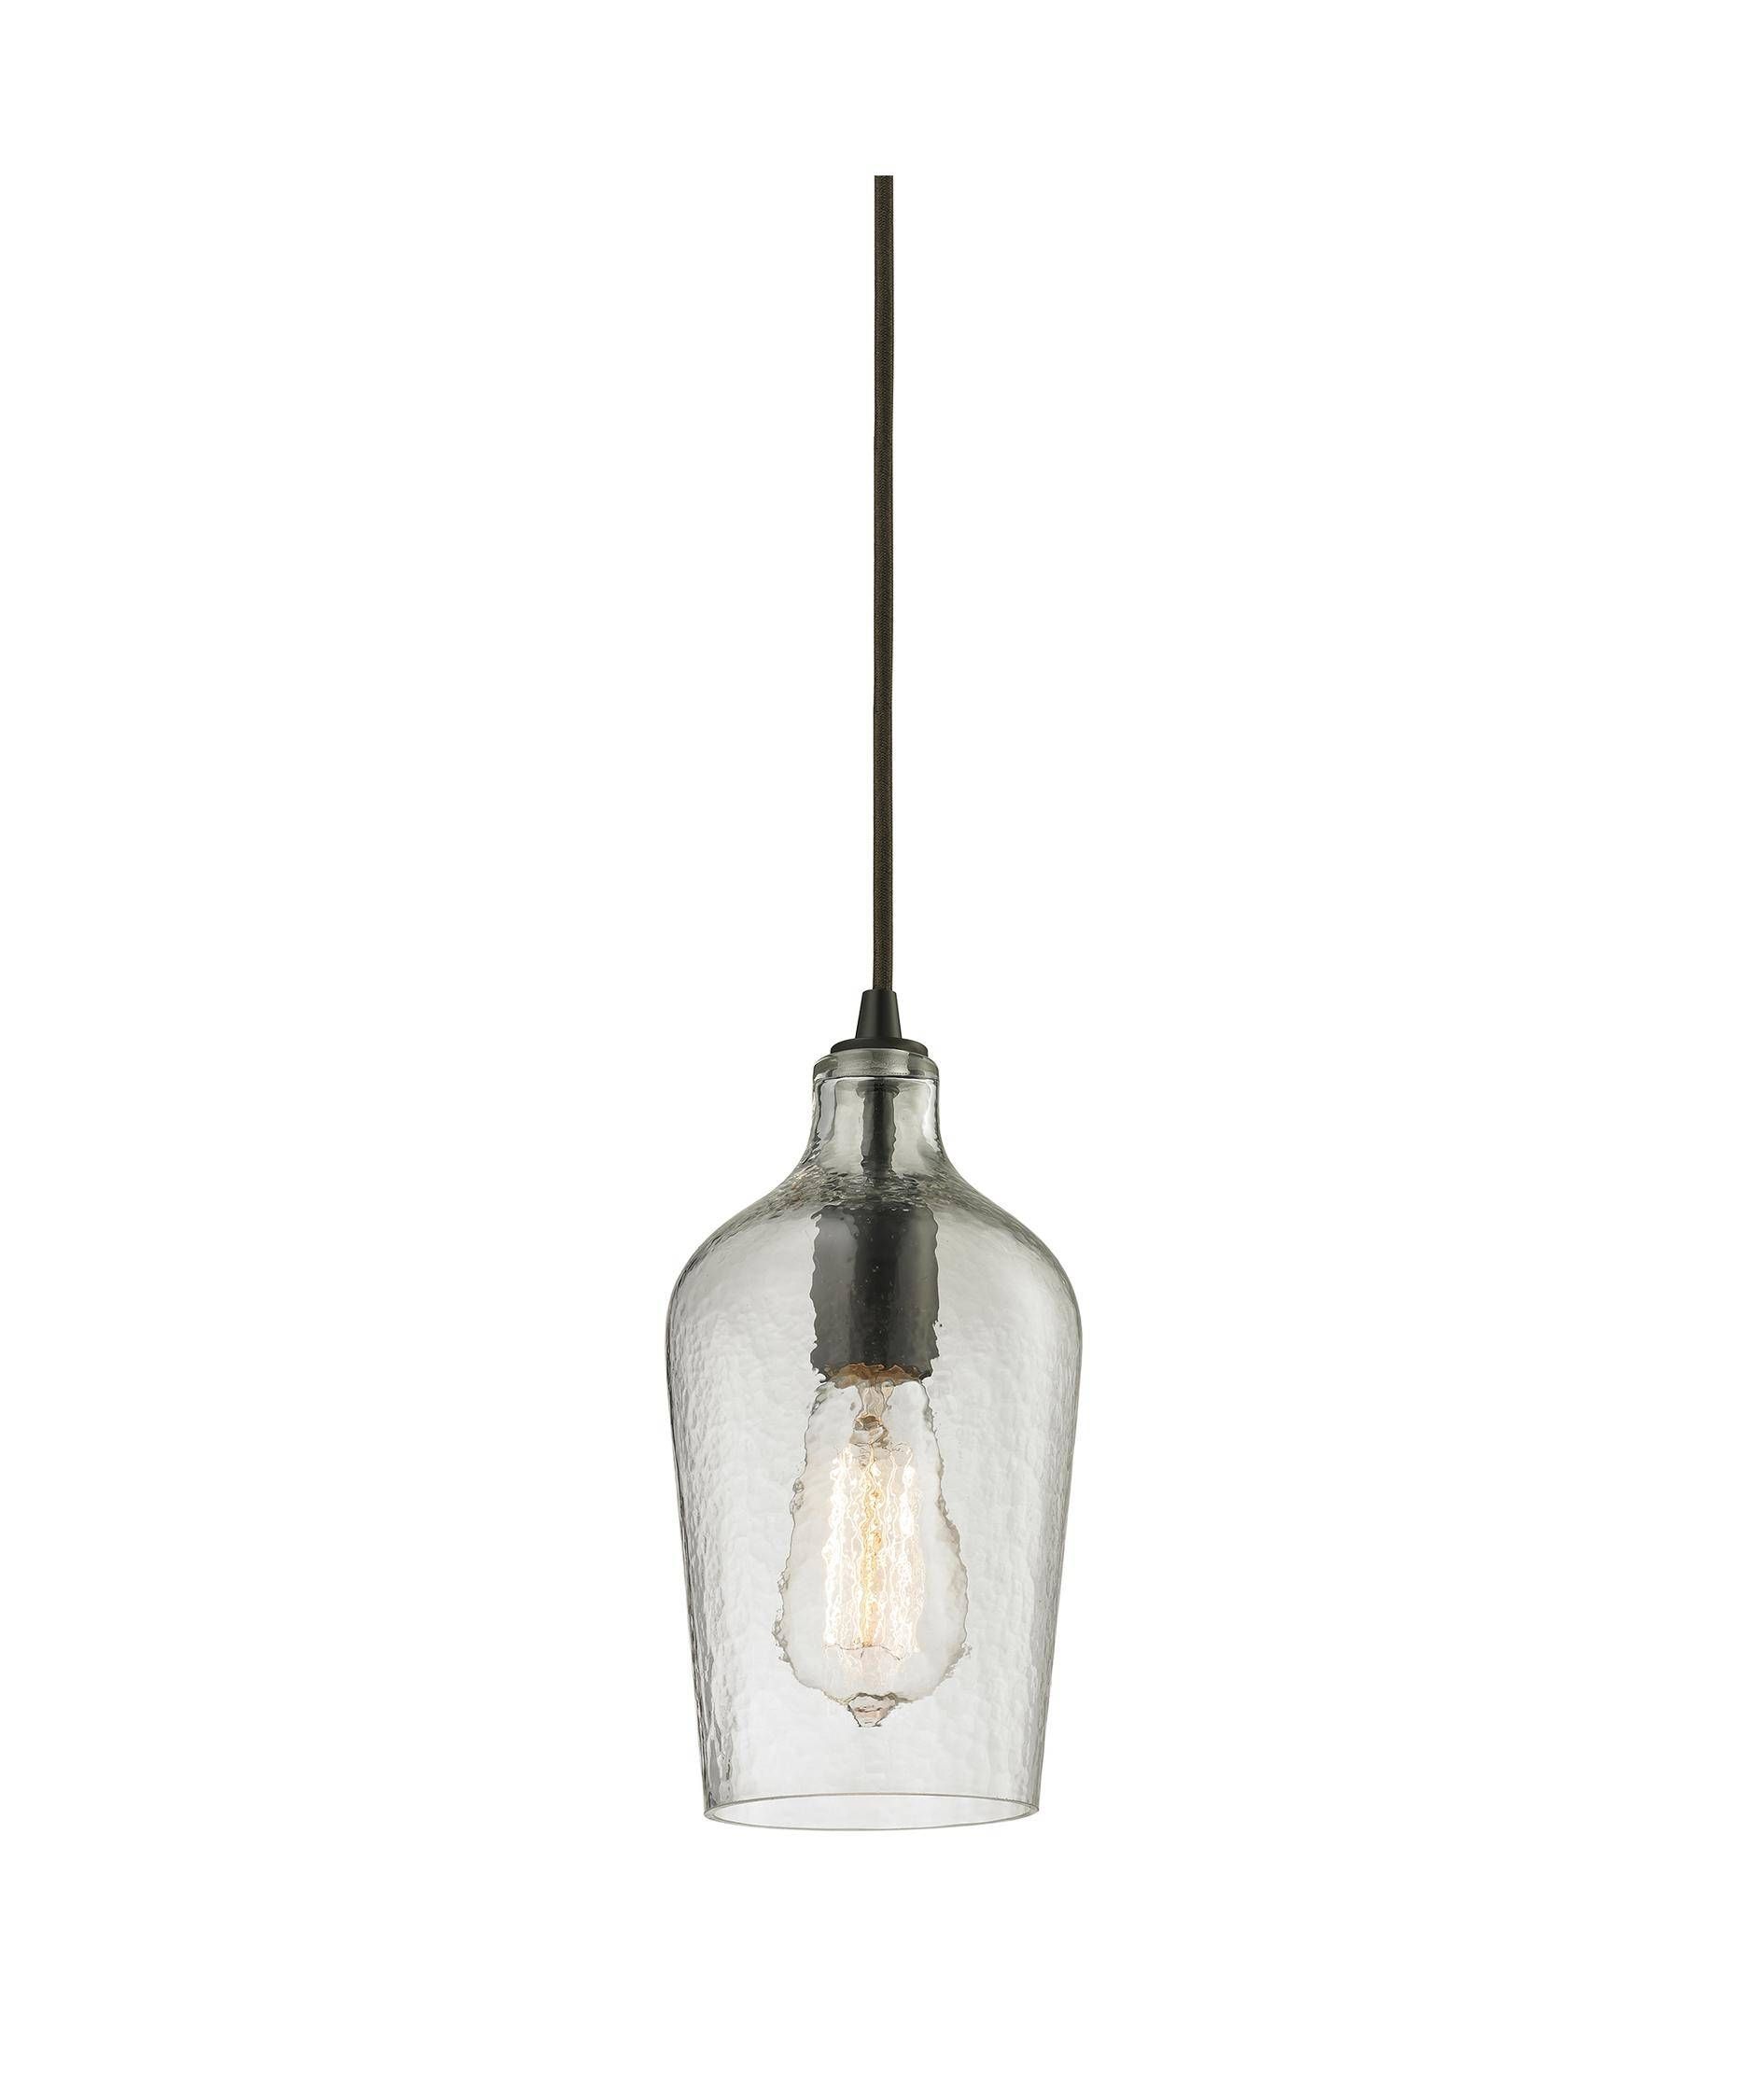 Elk Lighting 10331 1 Hammered Glass 2 Inch Wide 1 Light Mini Intended For Blown Glass Mini Pendant Lights (View 15 of 15)